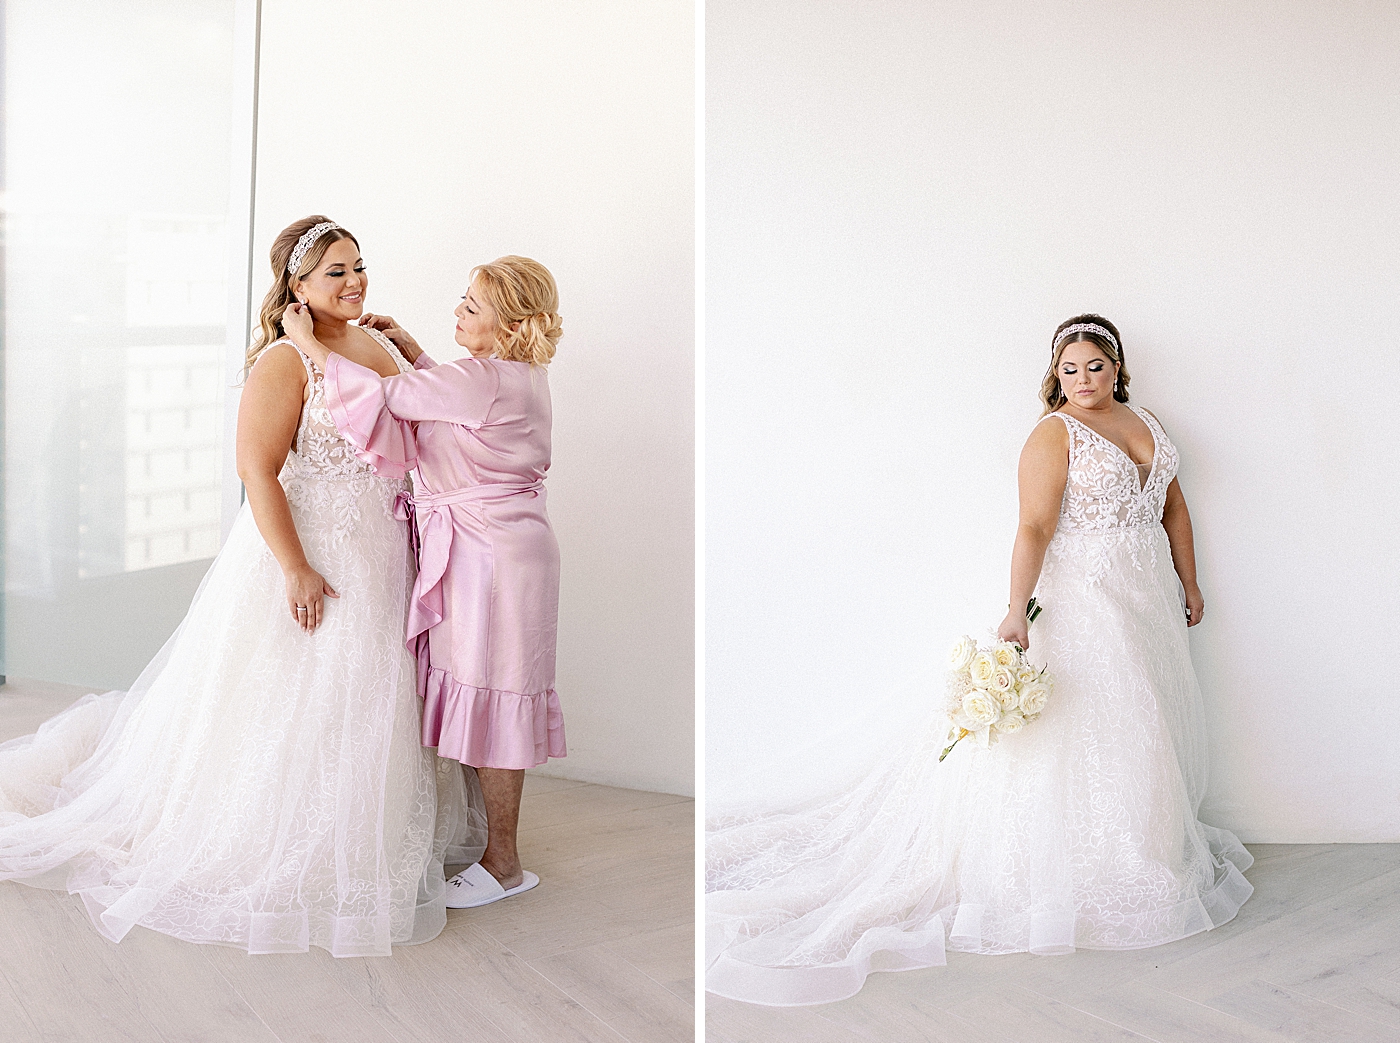 Bride getting ready getting help putting on dress and first portrait with bouquet Modern Elegant Wedding at The W South Beach captured by South Florida Wedding Photographer Erika Tuesta Photography